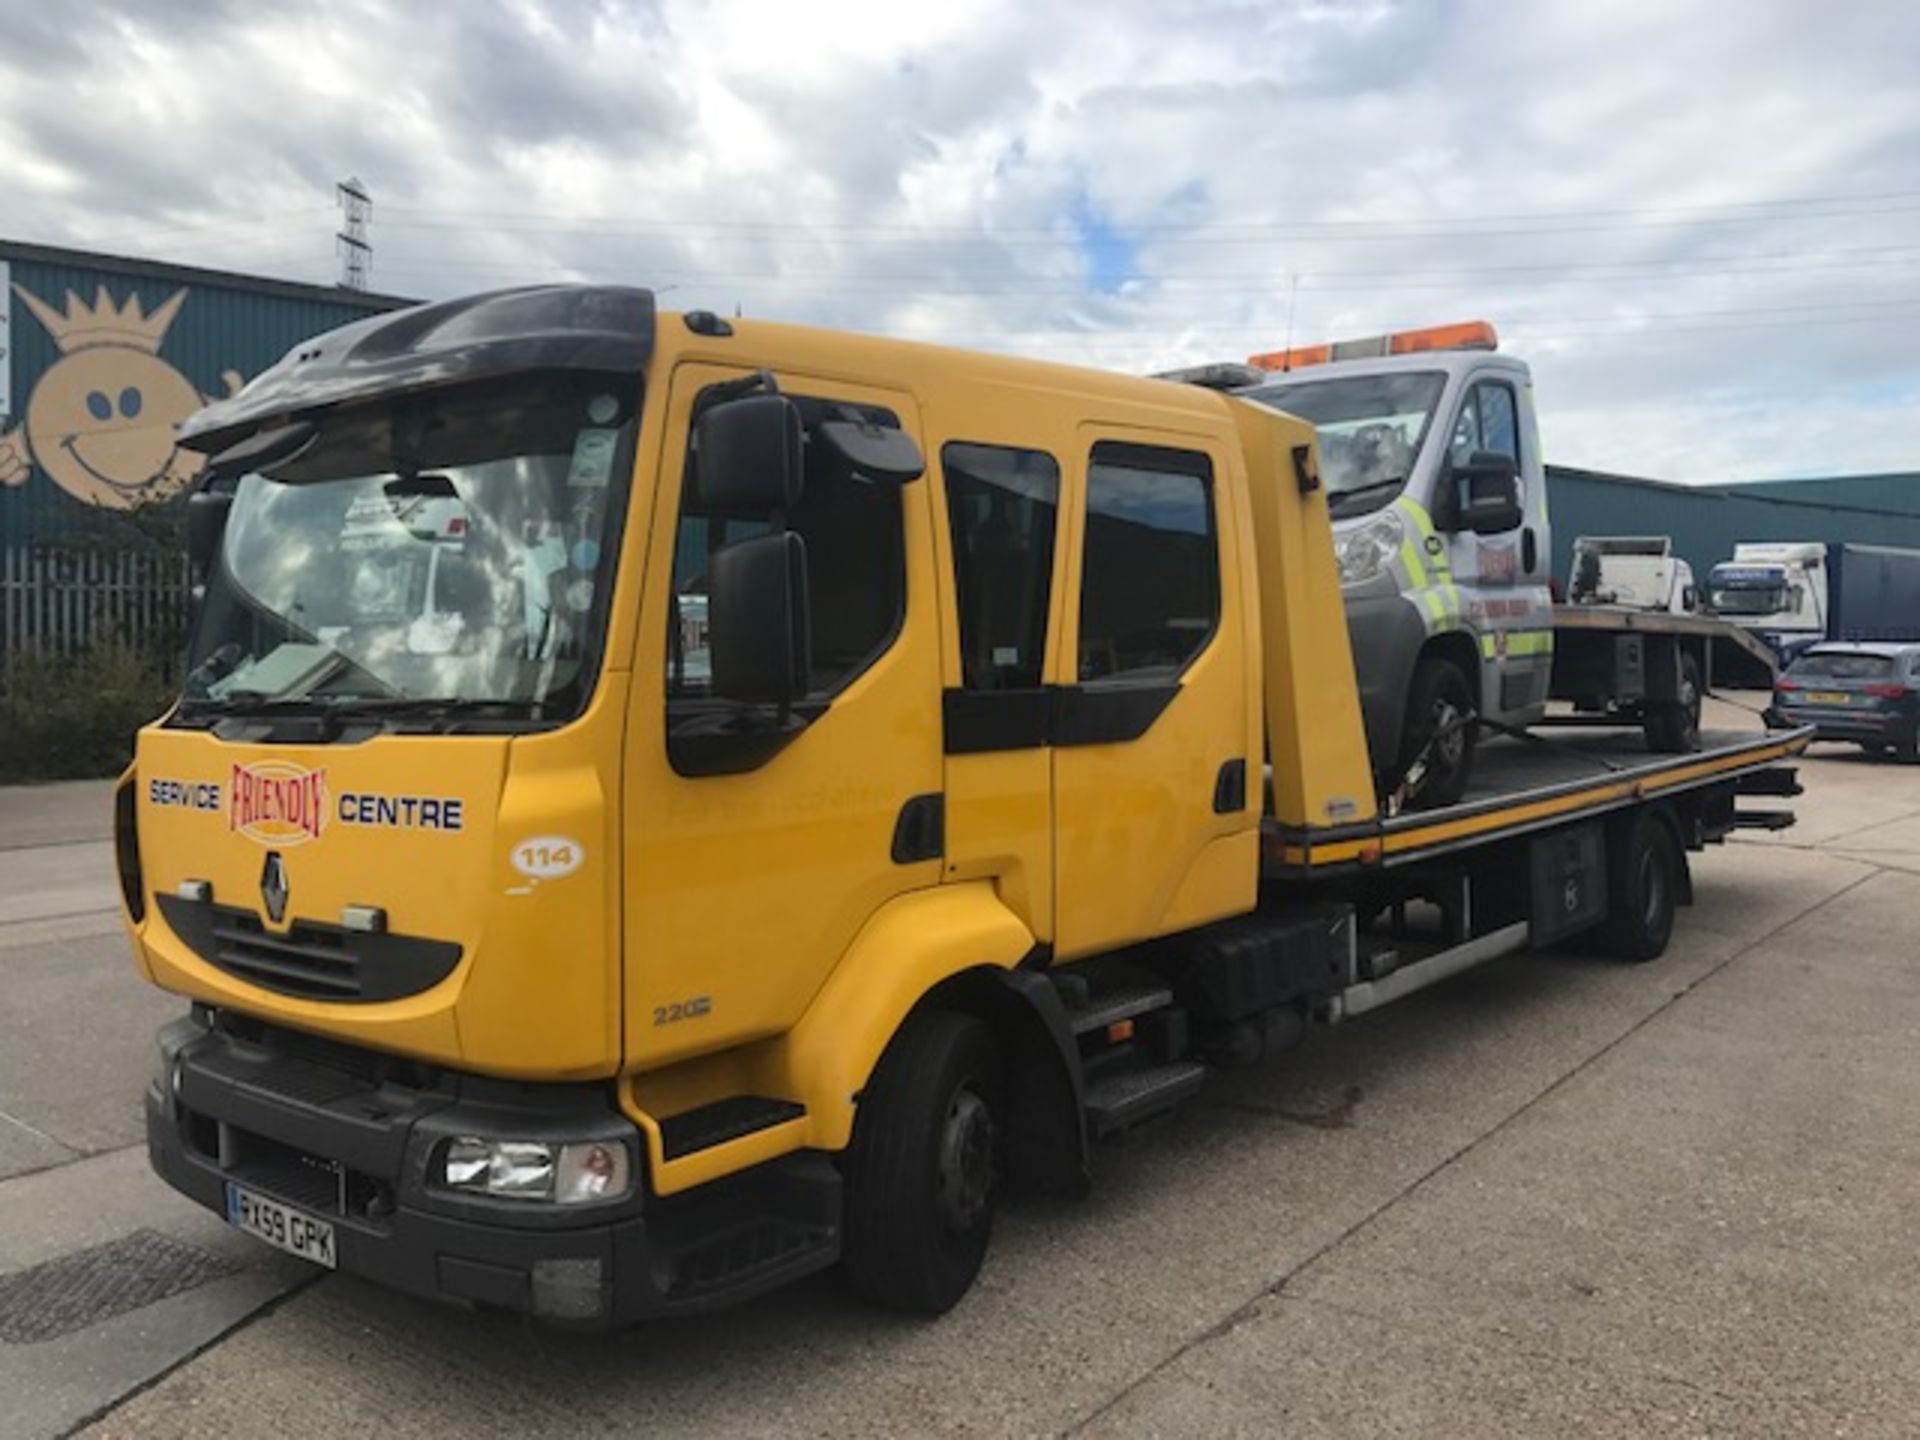 2010 Renault Midlum 220DXI 12t crew cab tilt and slide breakdown recovery vehicle with spec. lift, - Image 2 of 15